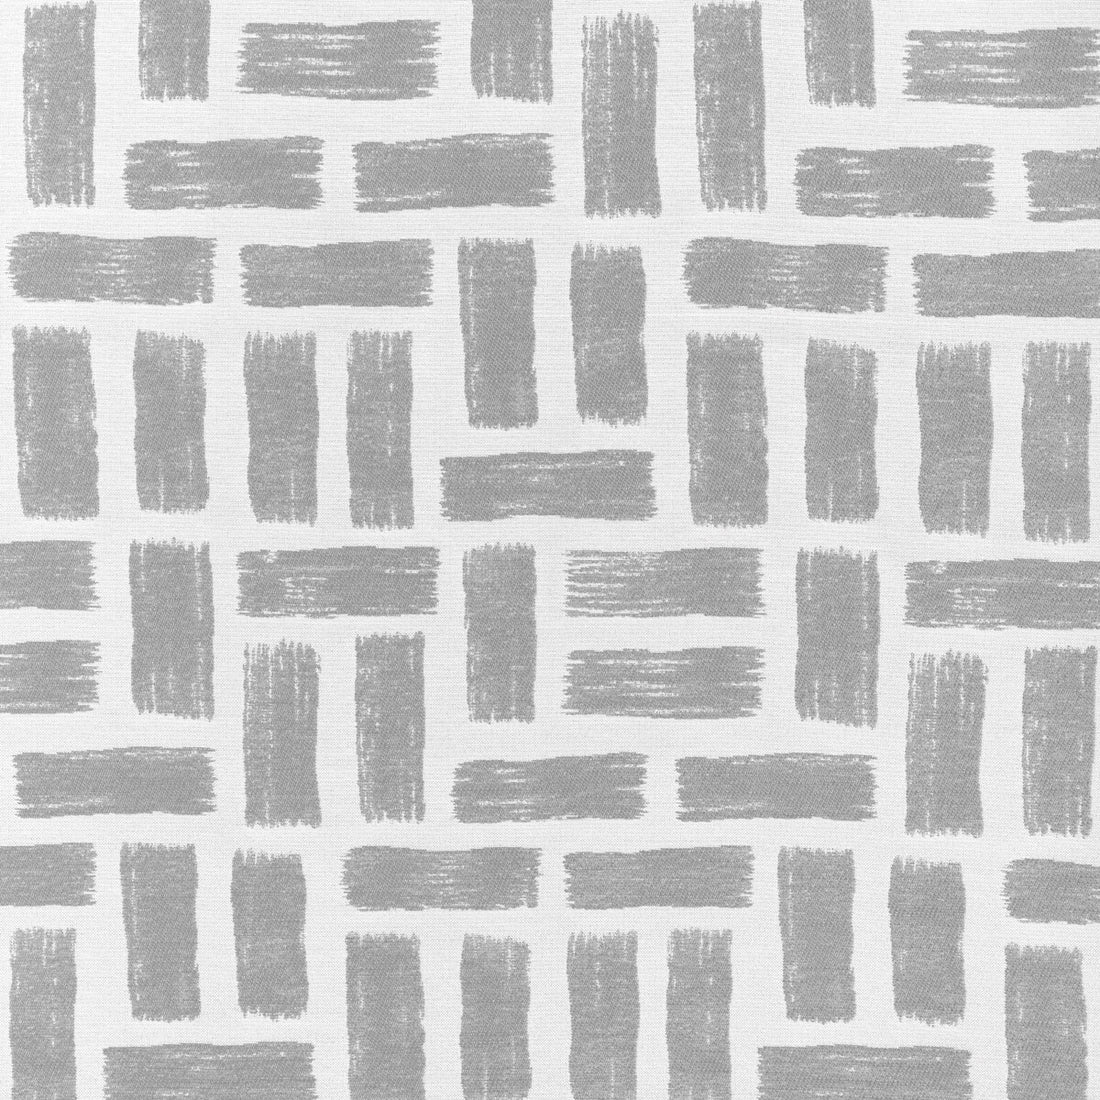 Brickwork fabric in stone color - pattern 37055.11.0 - by Kravet Design in the Thom Filicia Latitude collection